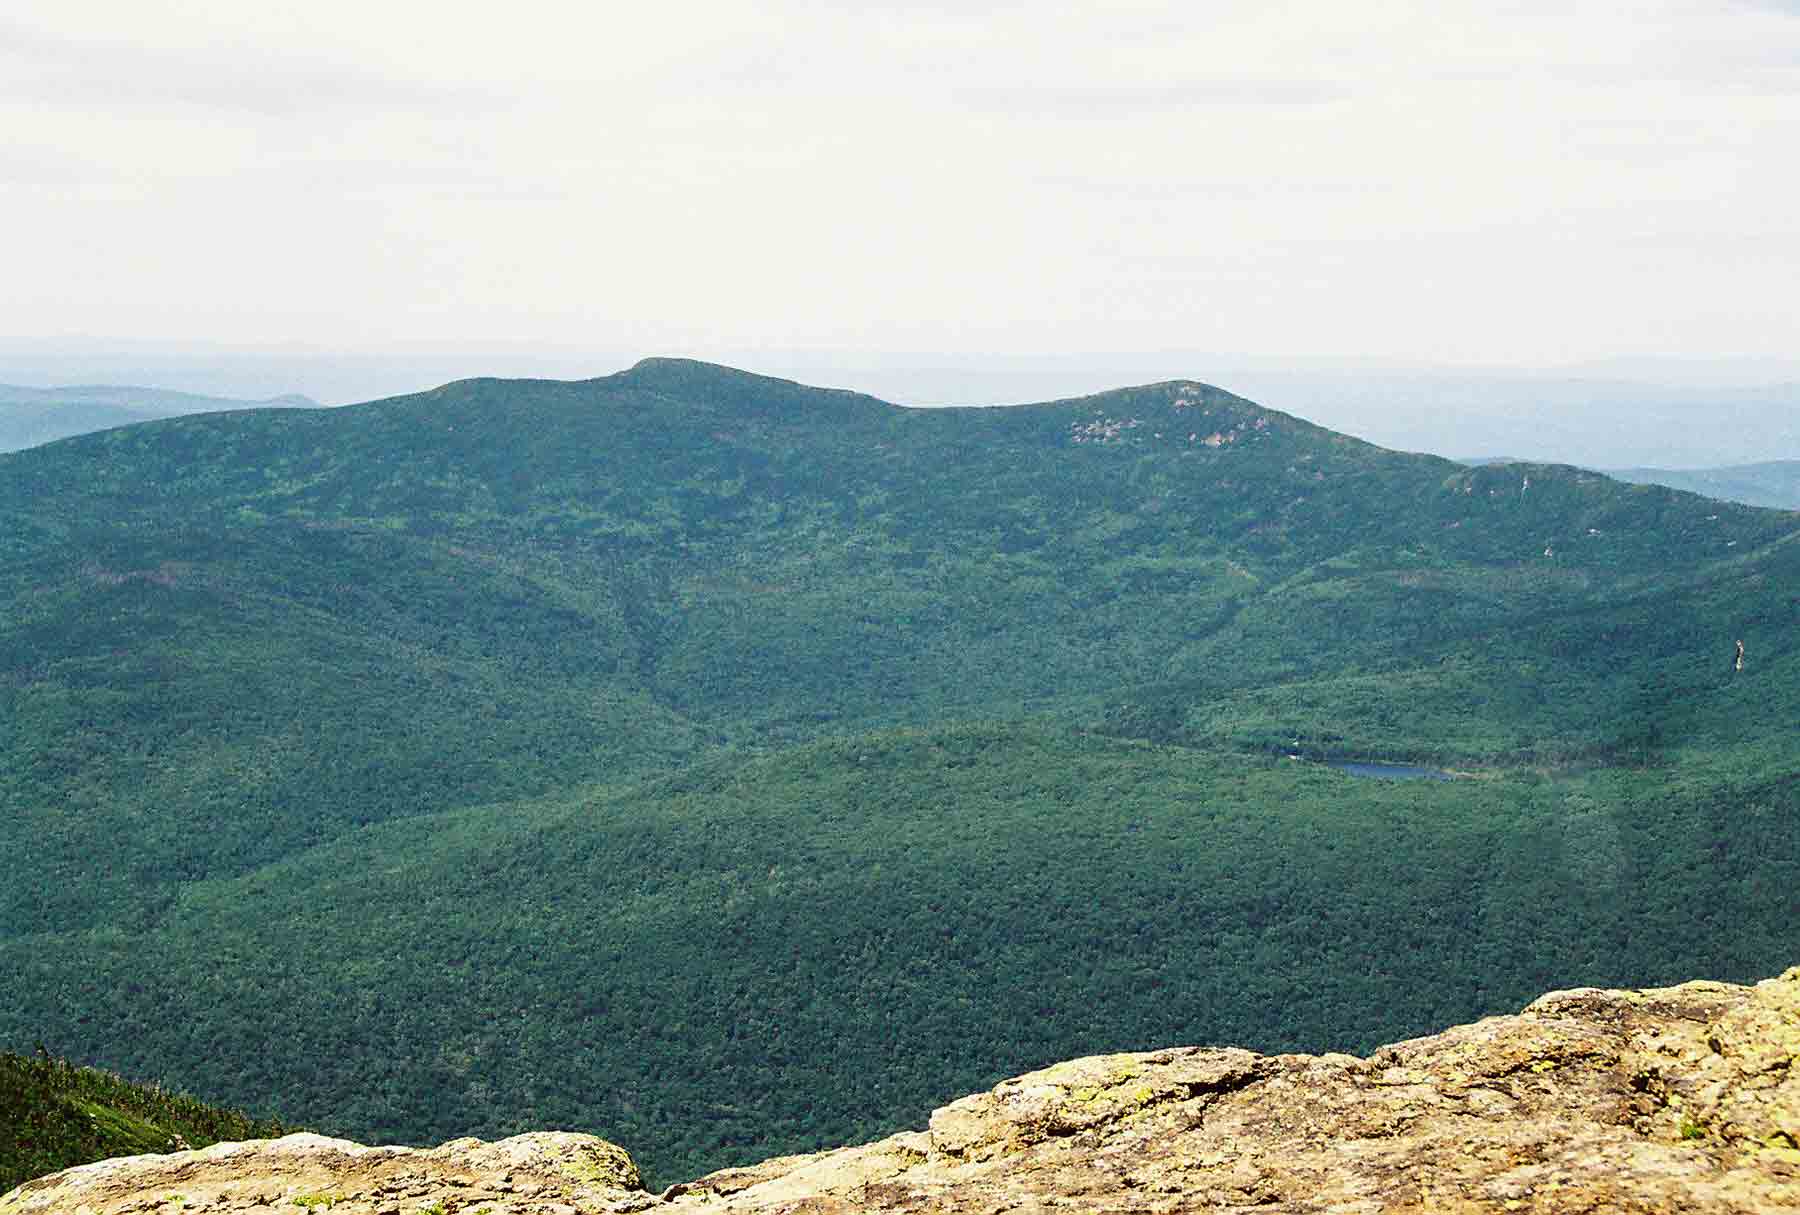 mm 22.3 - Looking west across Franconia Notch from Mt. Lincoln. Two peaks are North (on right) and South Kinsman. Lonesome Lake is also visible.  Courtesy dlcul@conncoll.edu